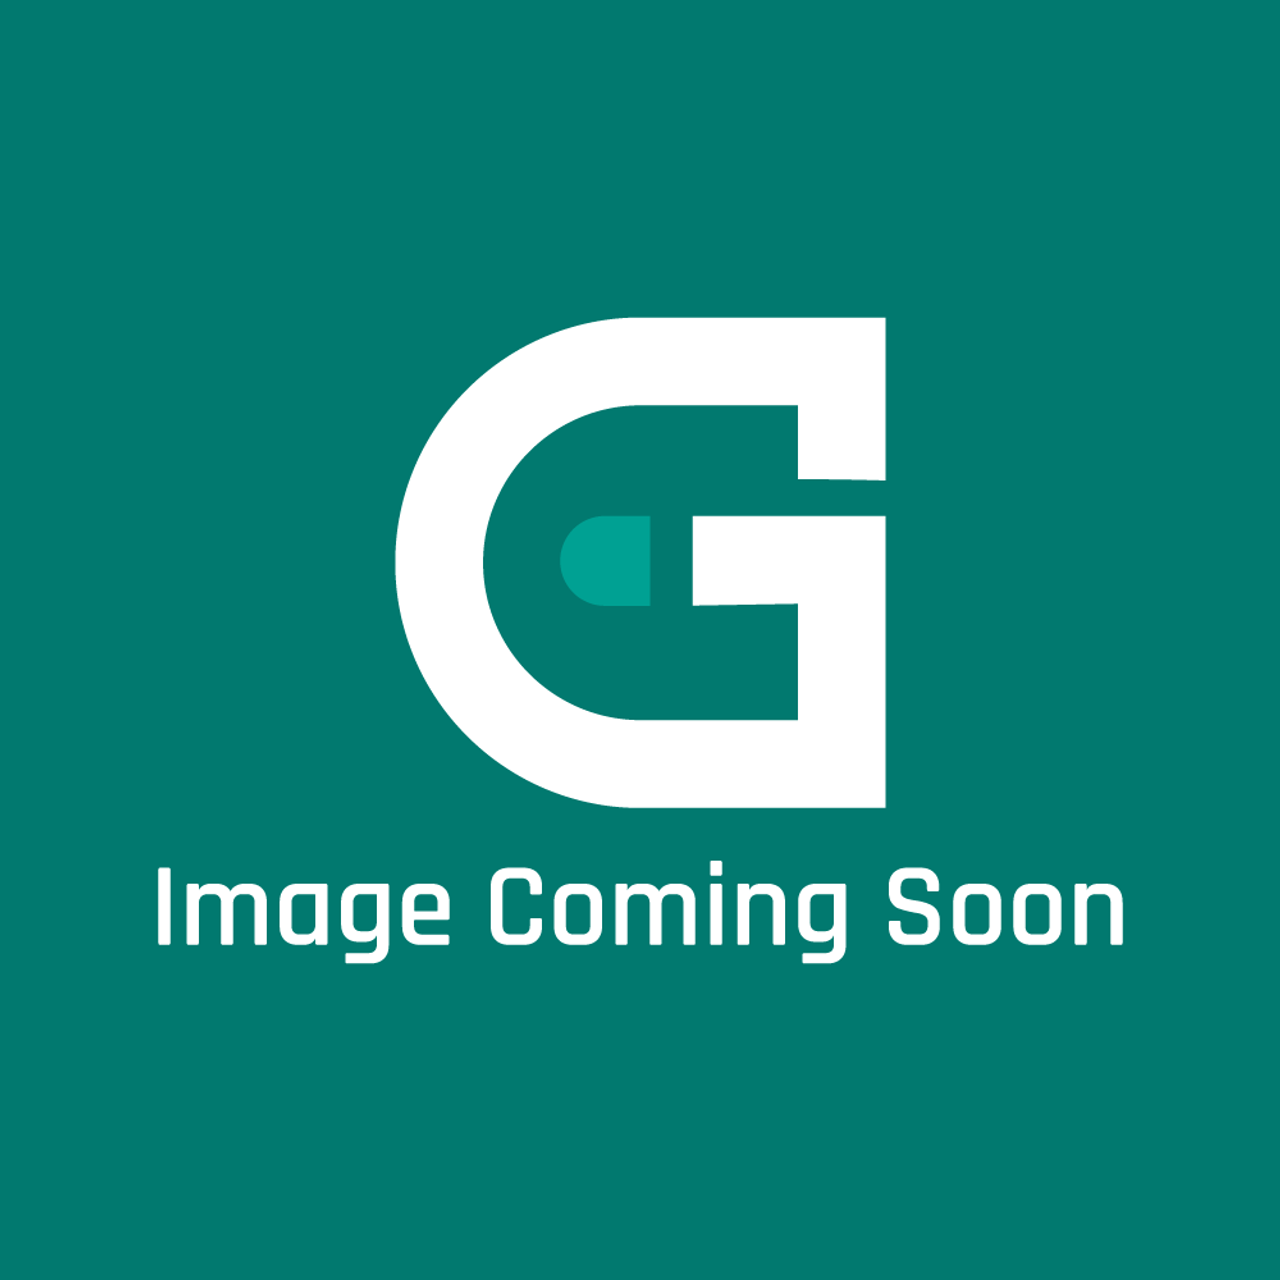 Frigidaire - Electrolux 316576678 Controller - Image Coming Soon!